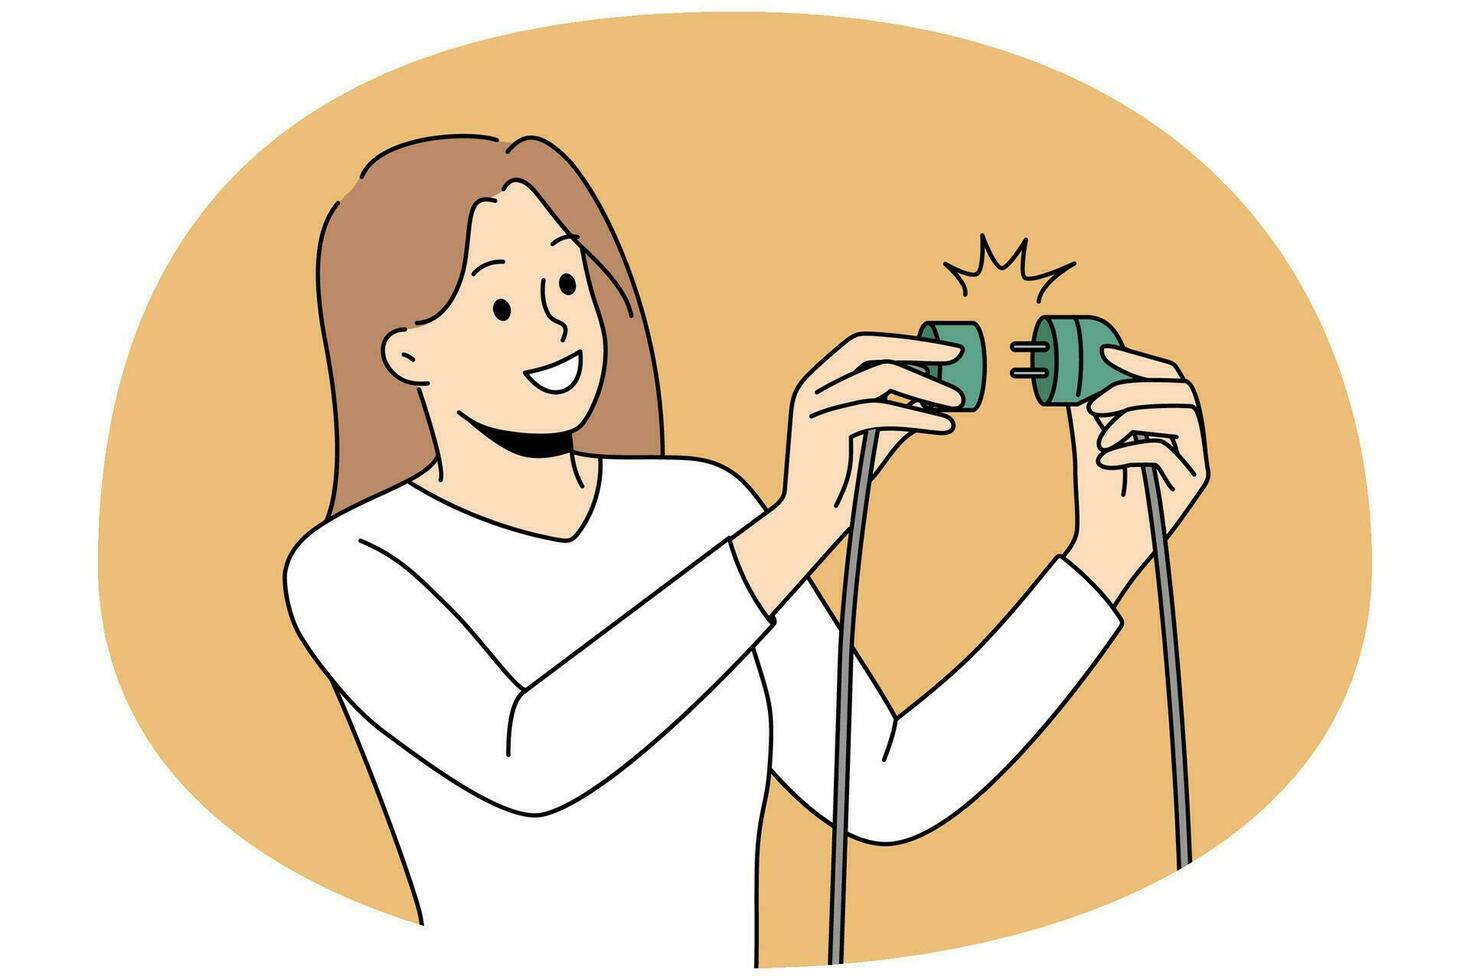 Smiling woman put electric plug into pocket. Concept of problem solution and effectiveness. Productivity and energy source. Vector illustration.